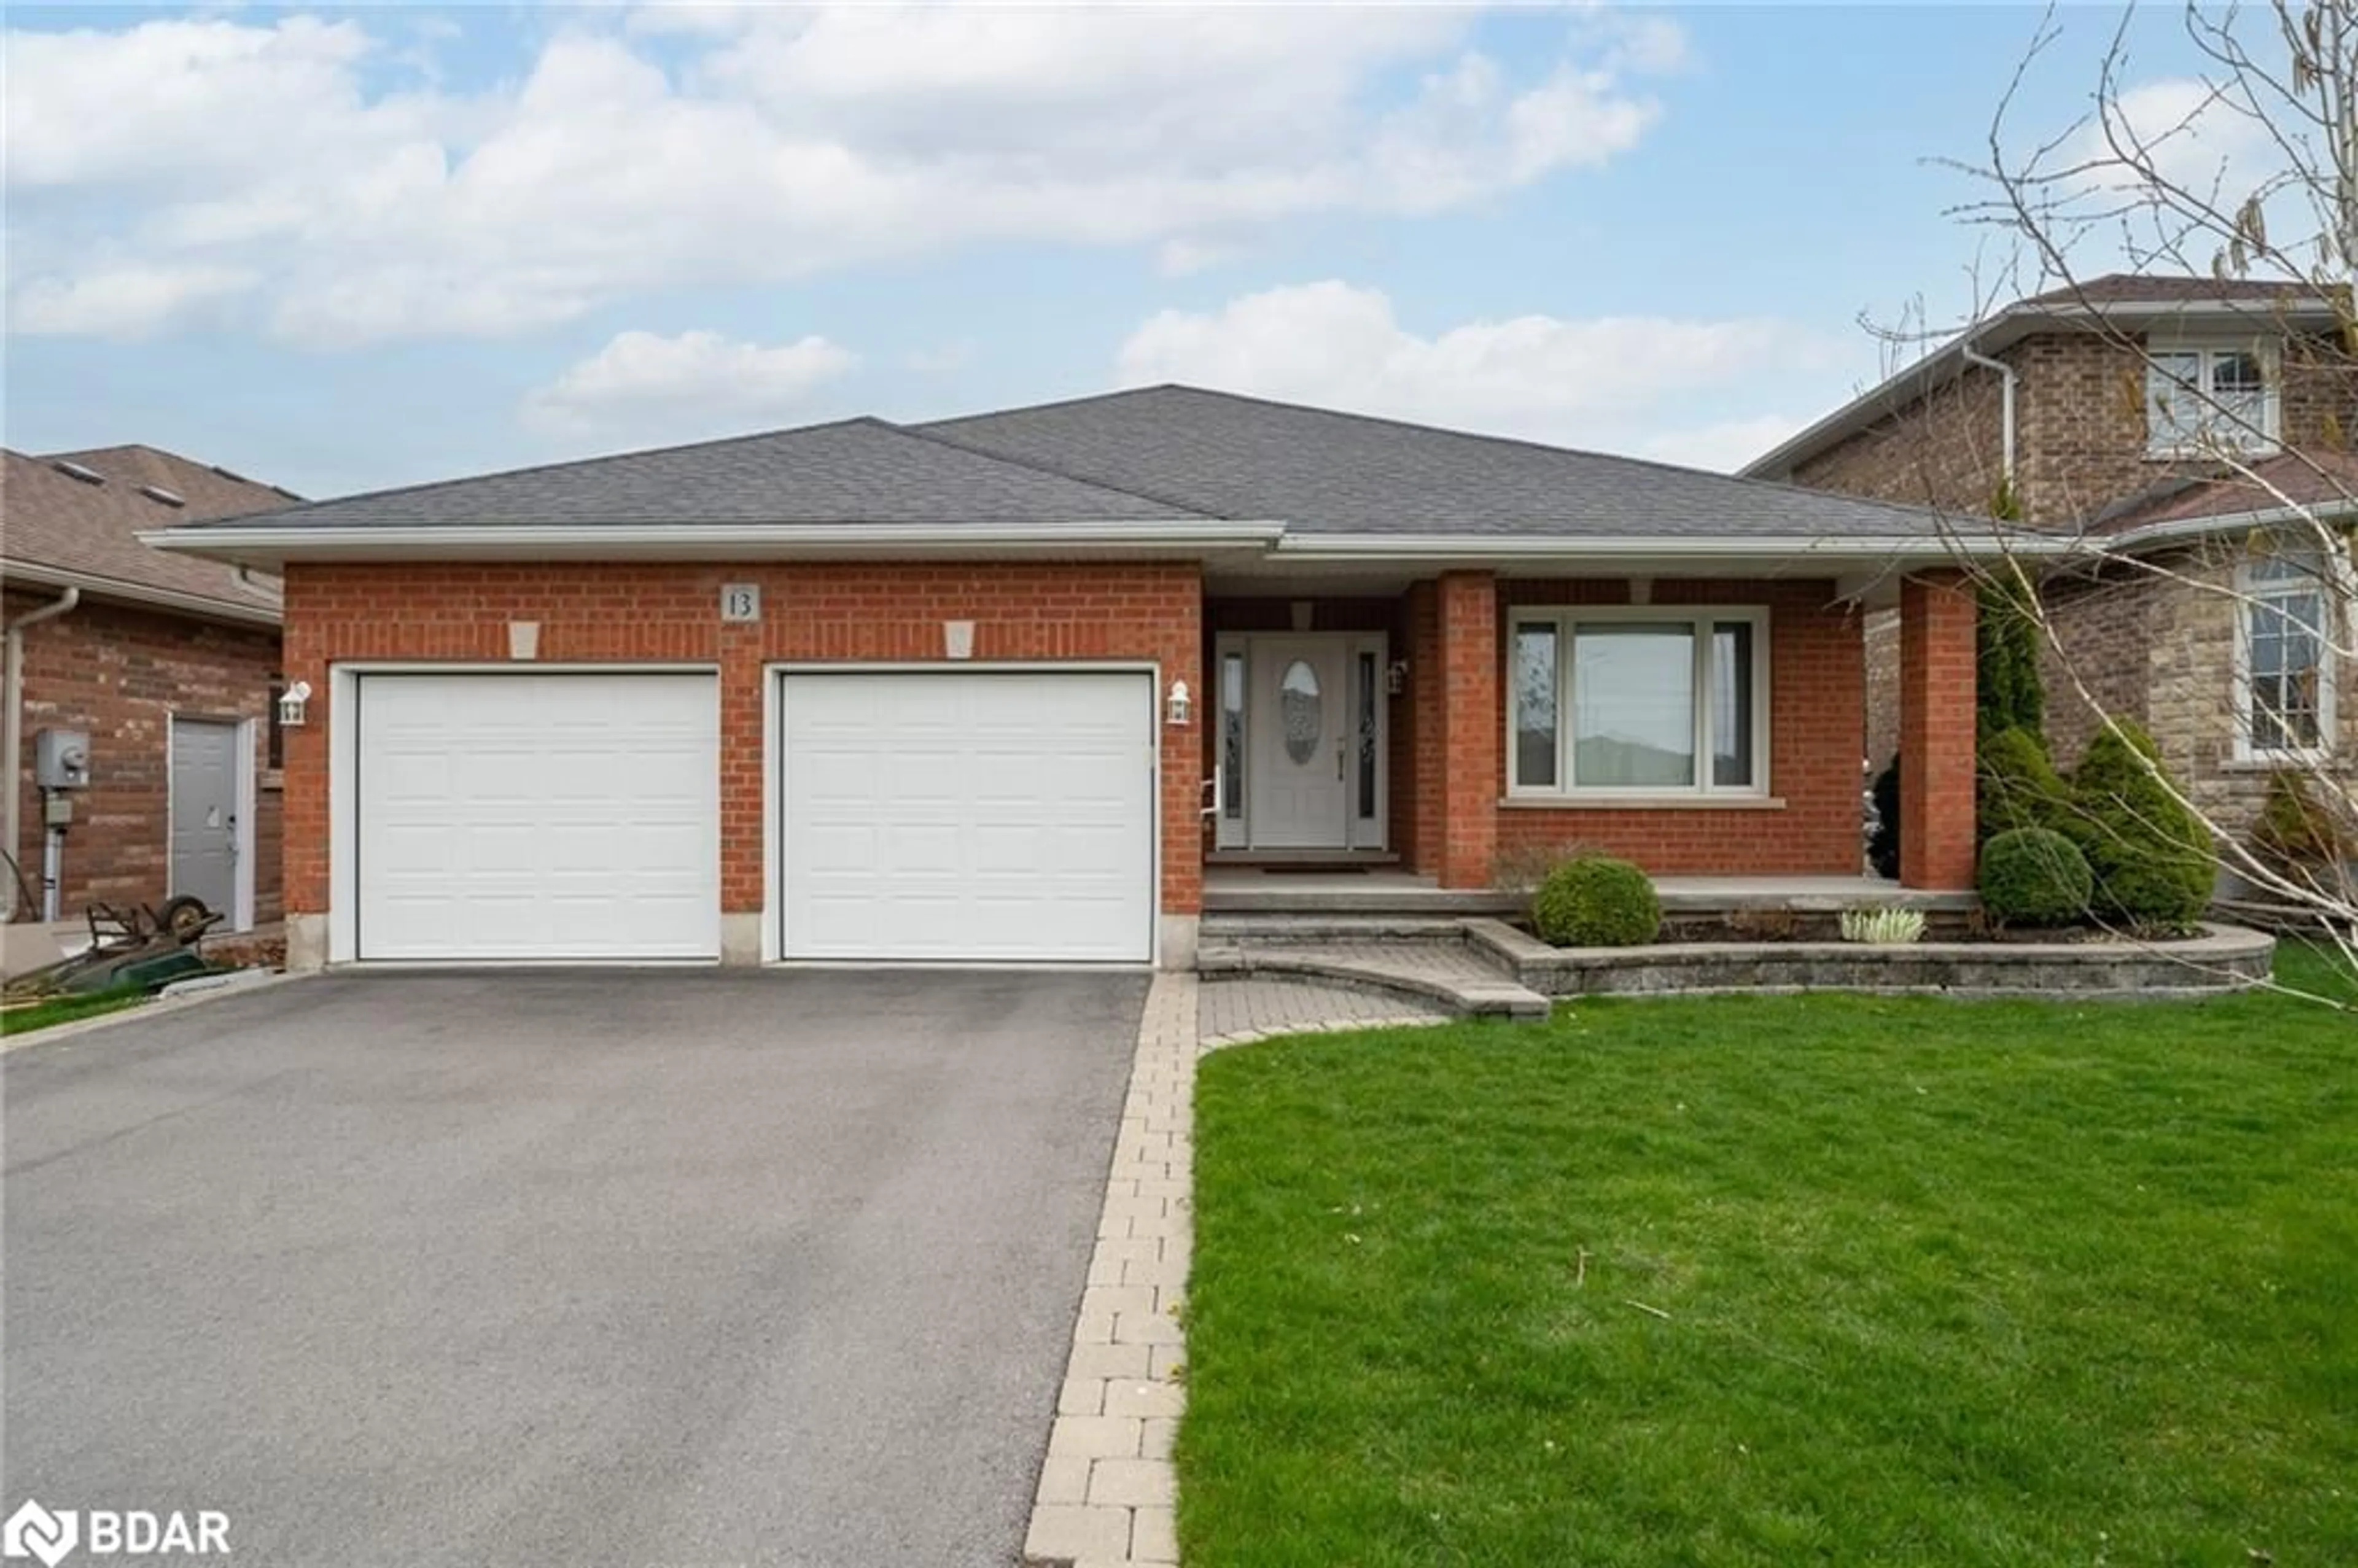 Home with brick exterior material for 13 Vertis Crt, Belleville Ontario K8N 0C9